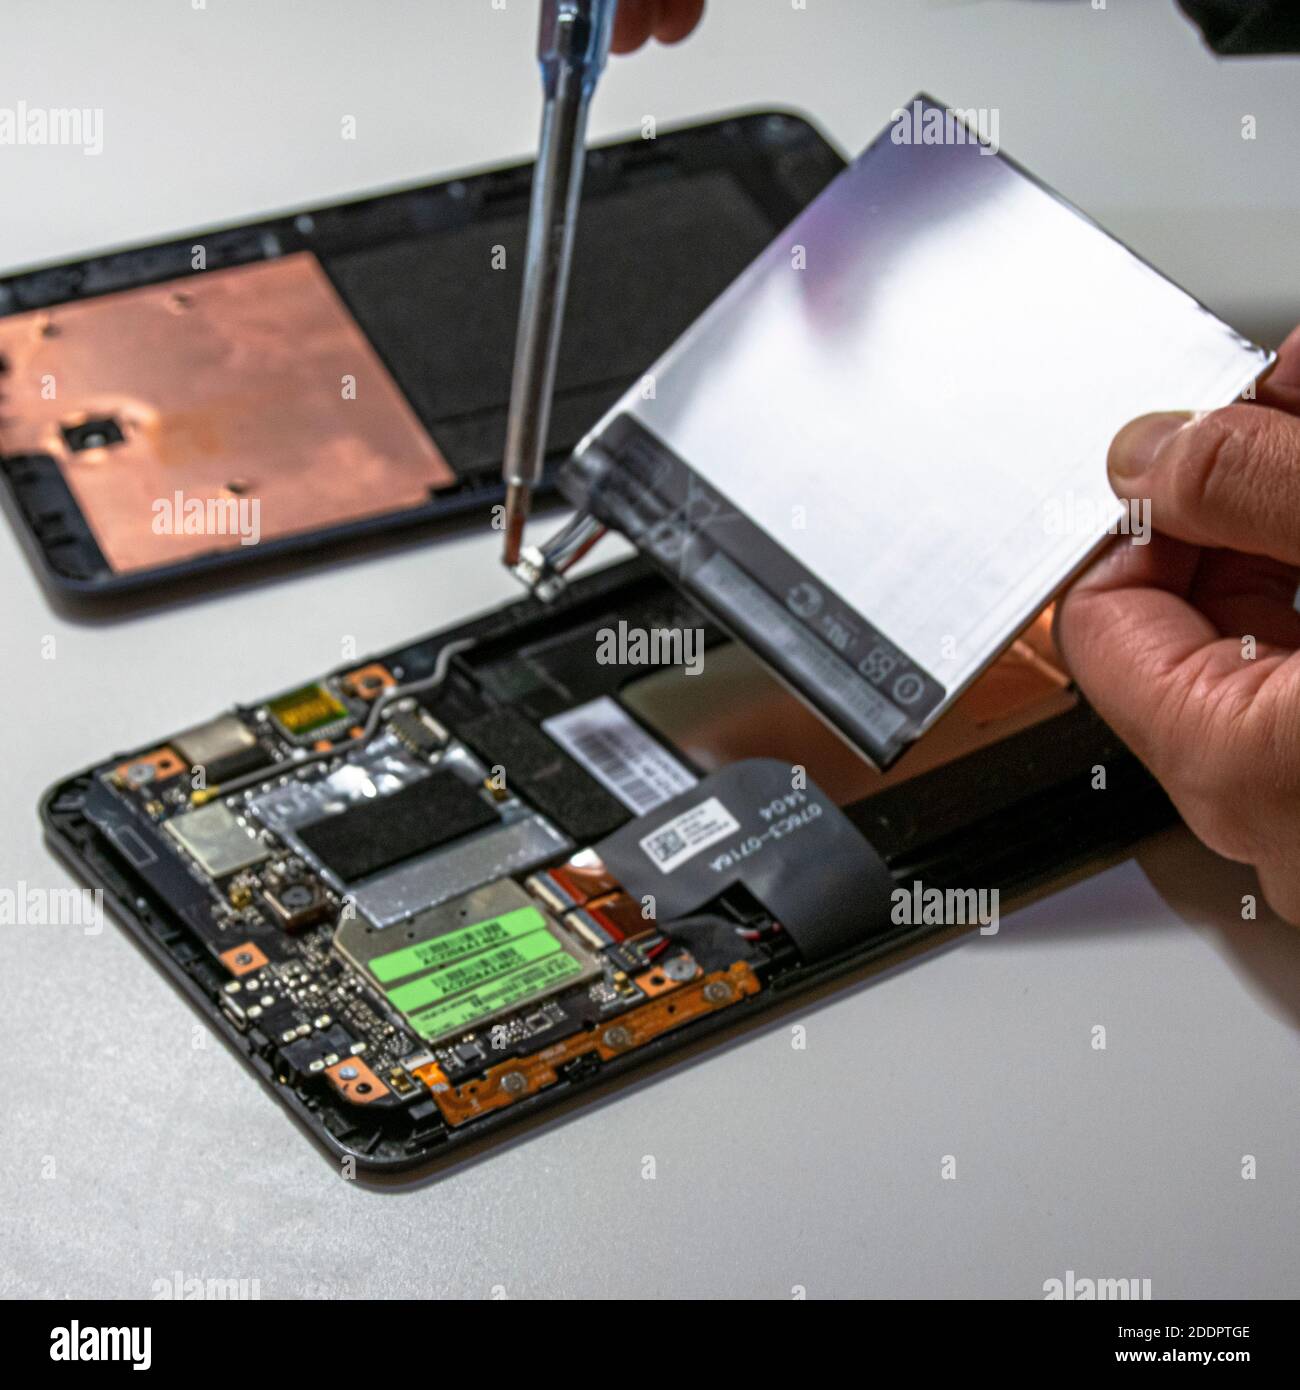 Man fixing an electronic device or fixing tablet issues by removing battery. Reparations jobs on electronics like tablets. Stock Photo